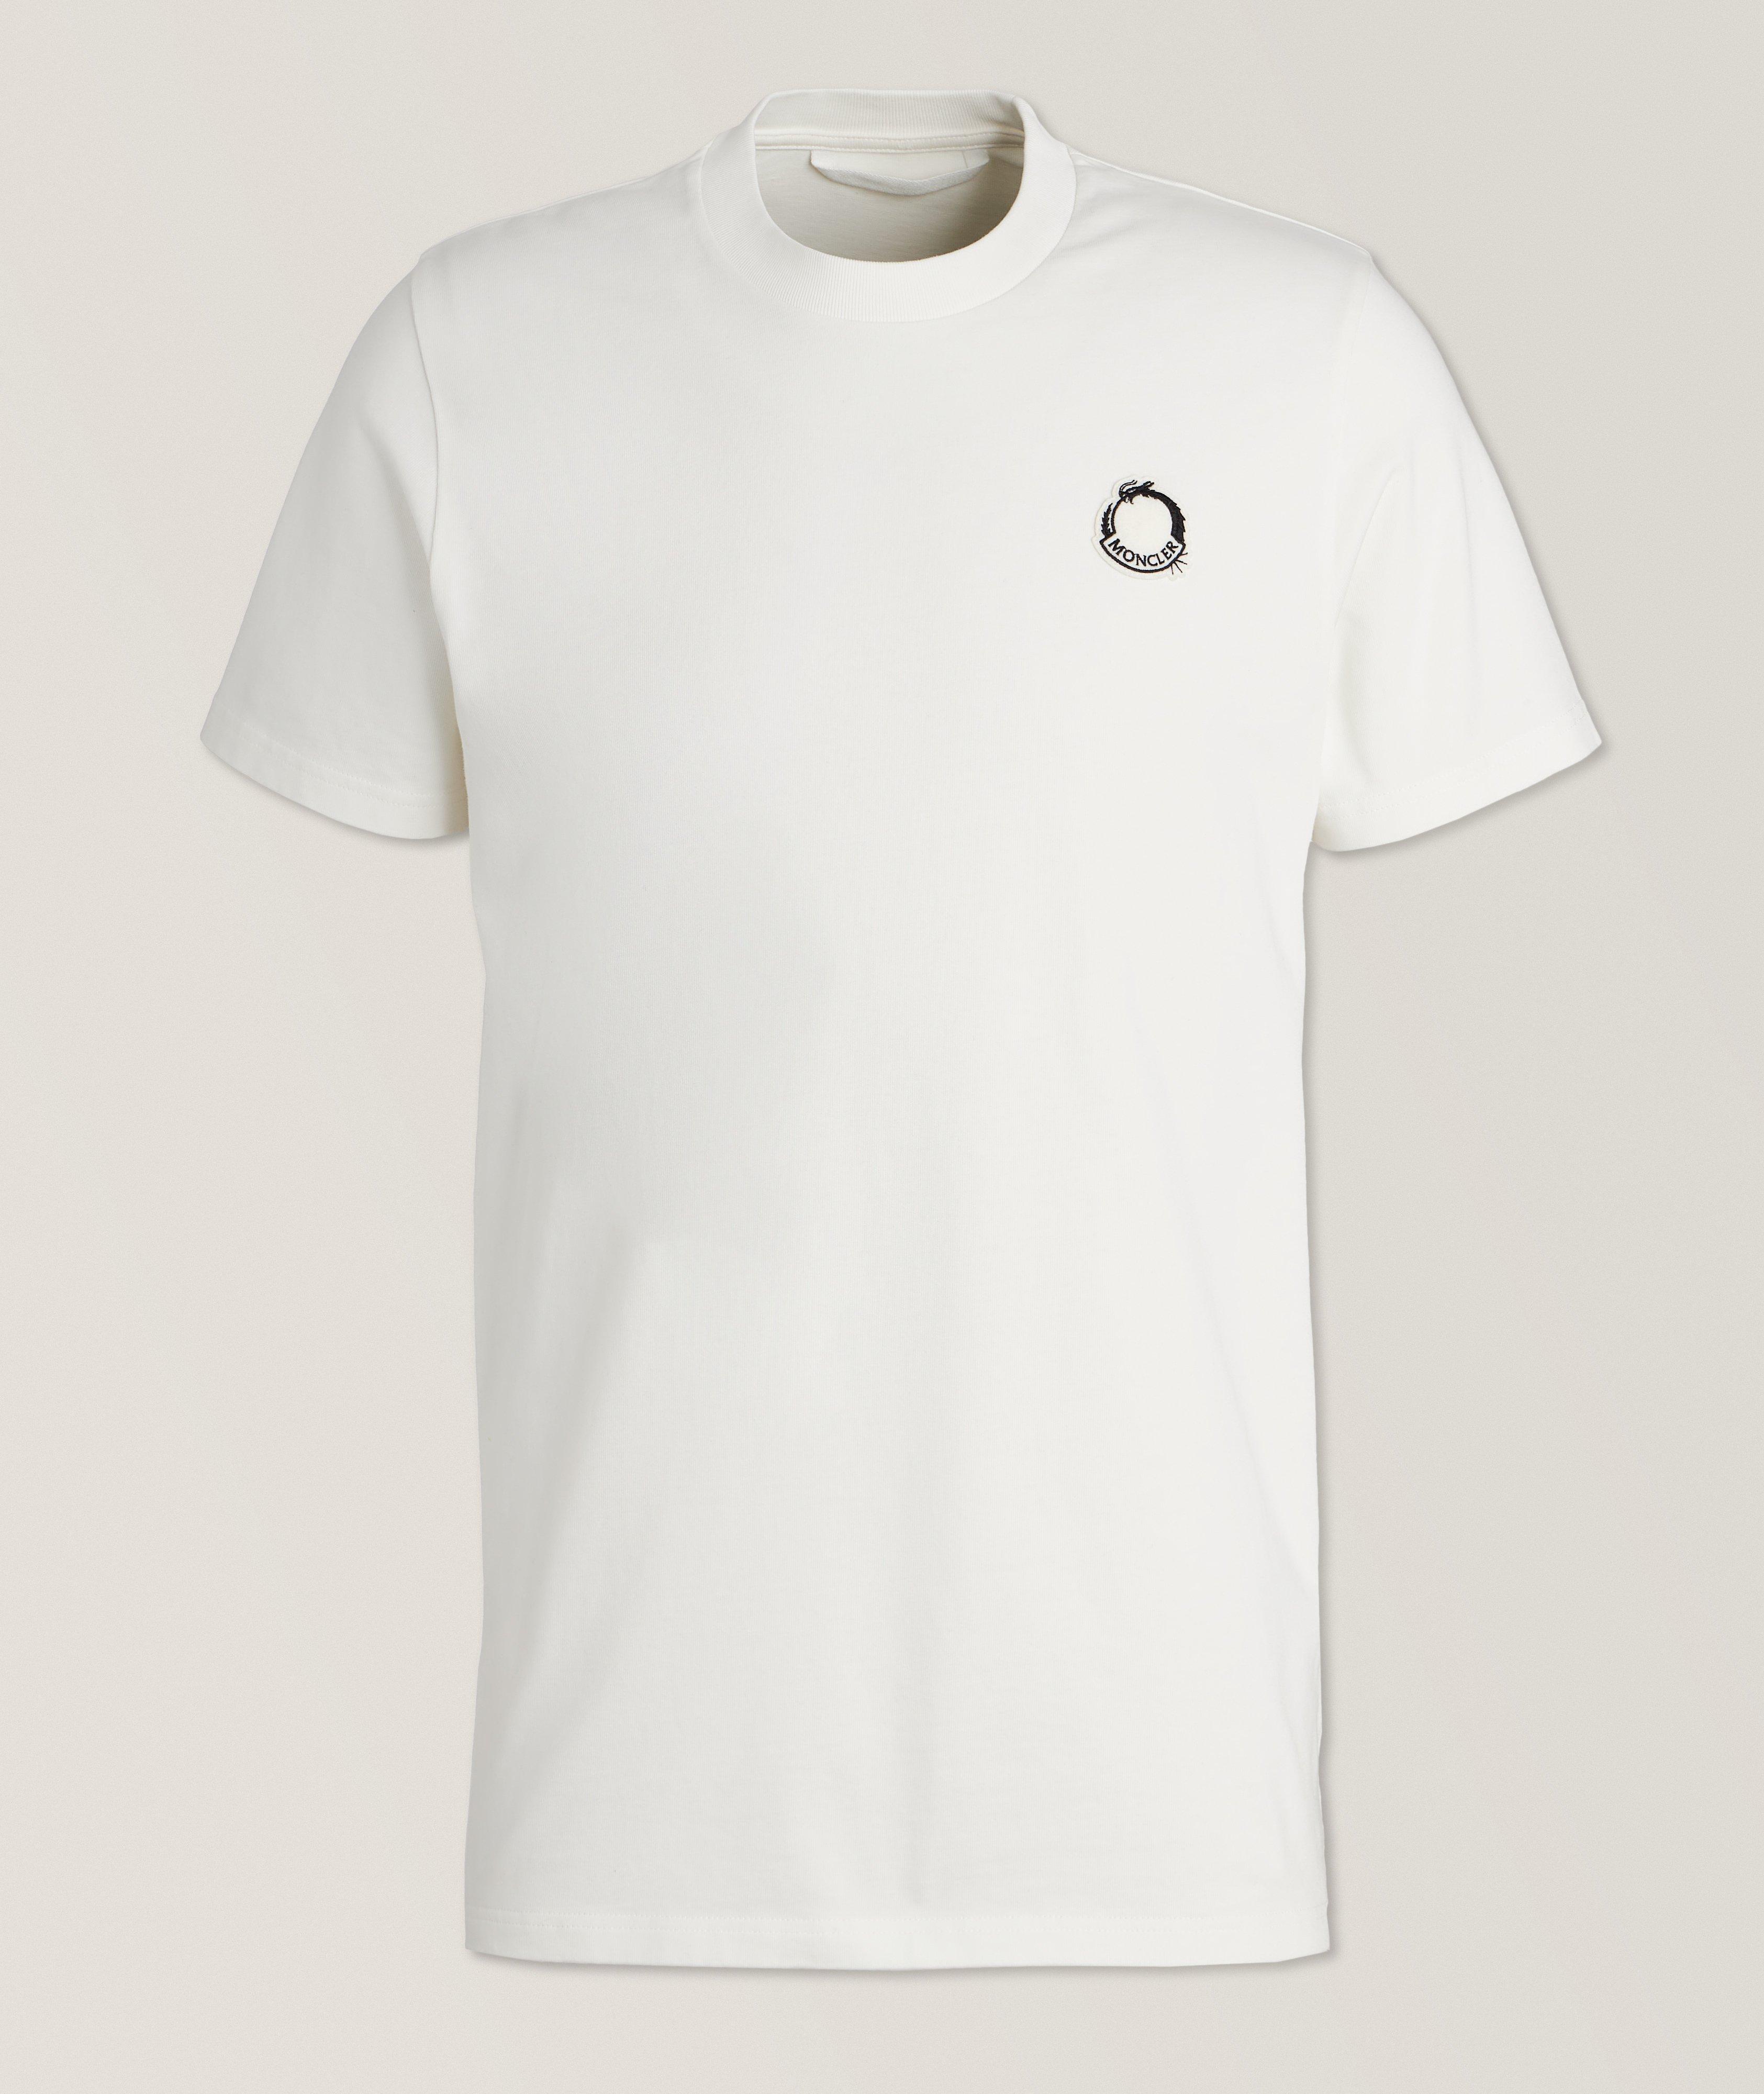 Moncler Year of The Dragon Colletion Cotton T-Shirt | T-Shirts | Harry ...